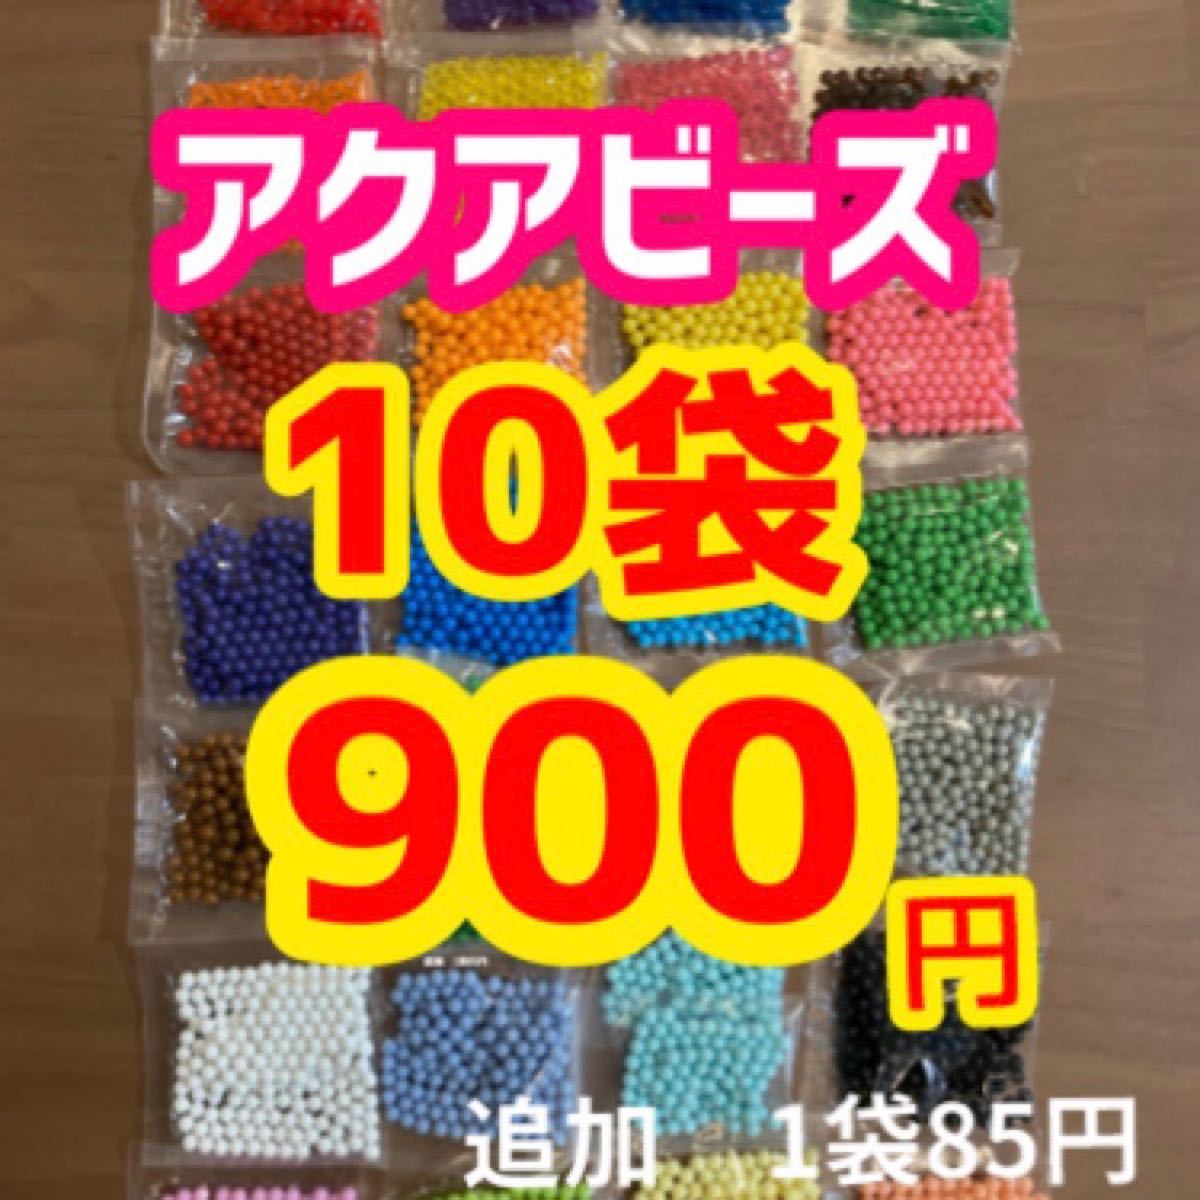 64%OFF!】 正規アクアビーズ 100個入り10袋セット shellys.co.in